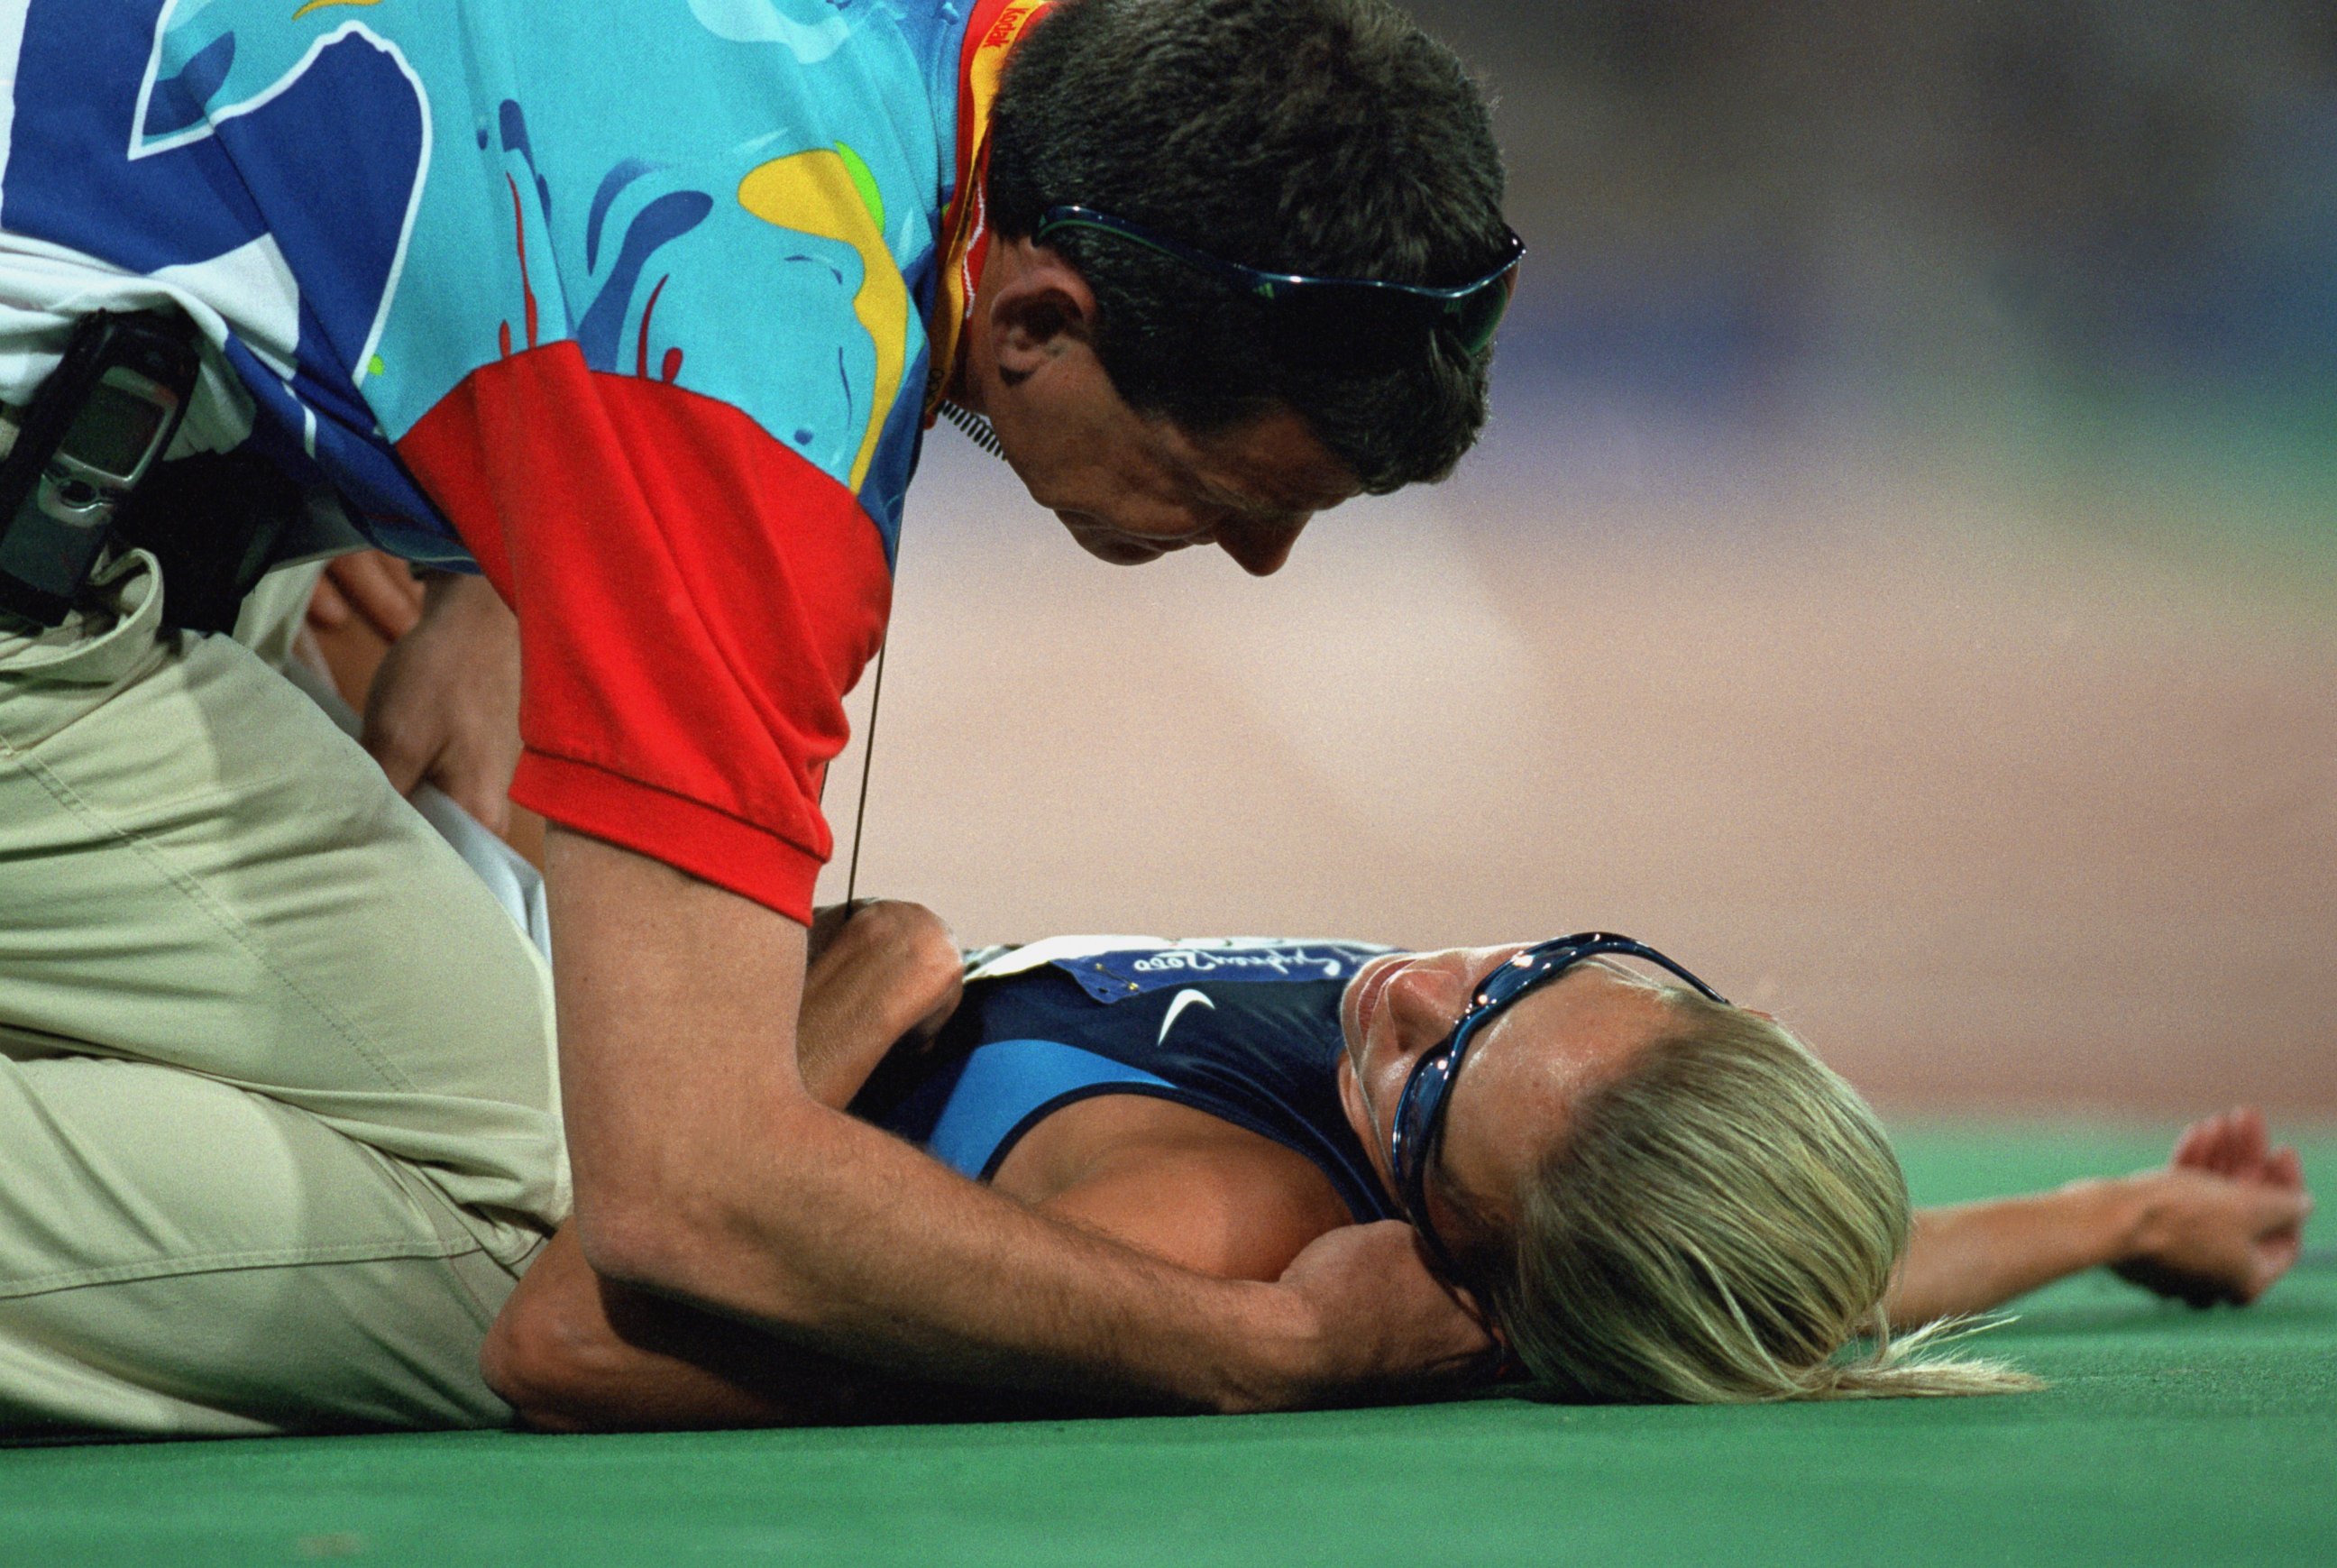 PHOTO: Suzy Favor-Hamilton lays on the track from over exertion after the womens' 1500 meter race during the  Olympics at the Olympic Stadium in Sydney, on Sept. 30, 2000. 